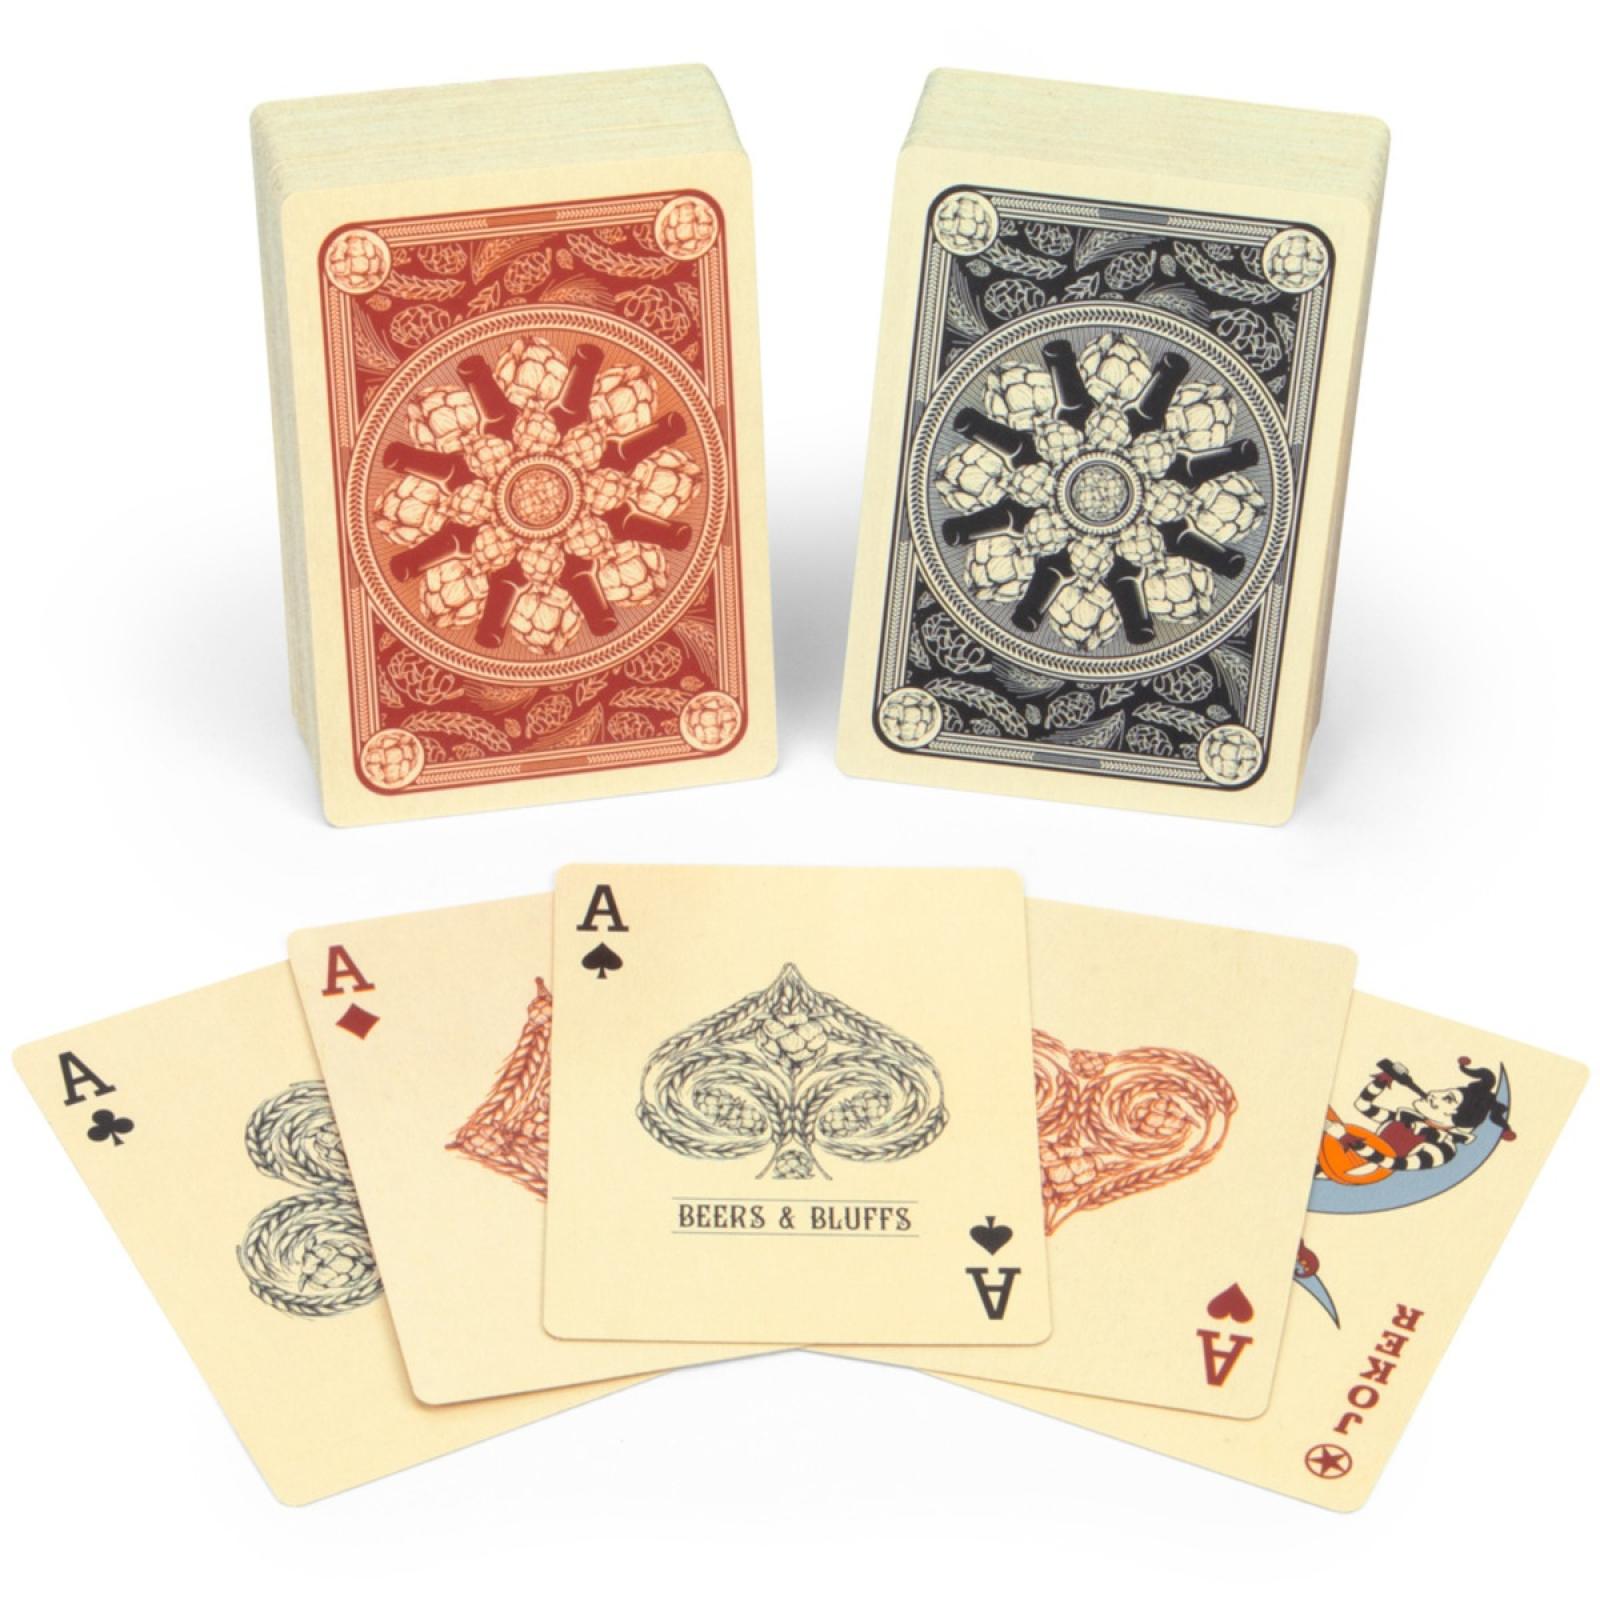 Beers & Bluffs Poker Chip Set Cards